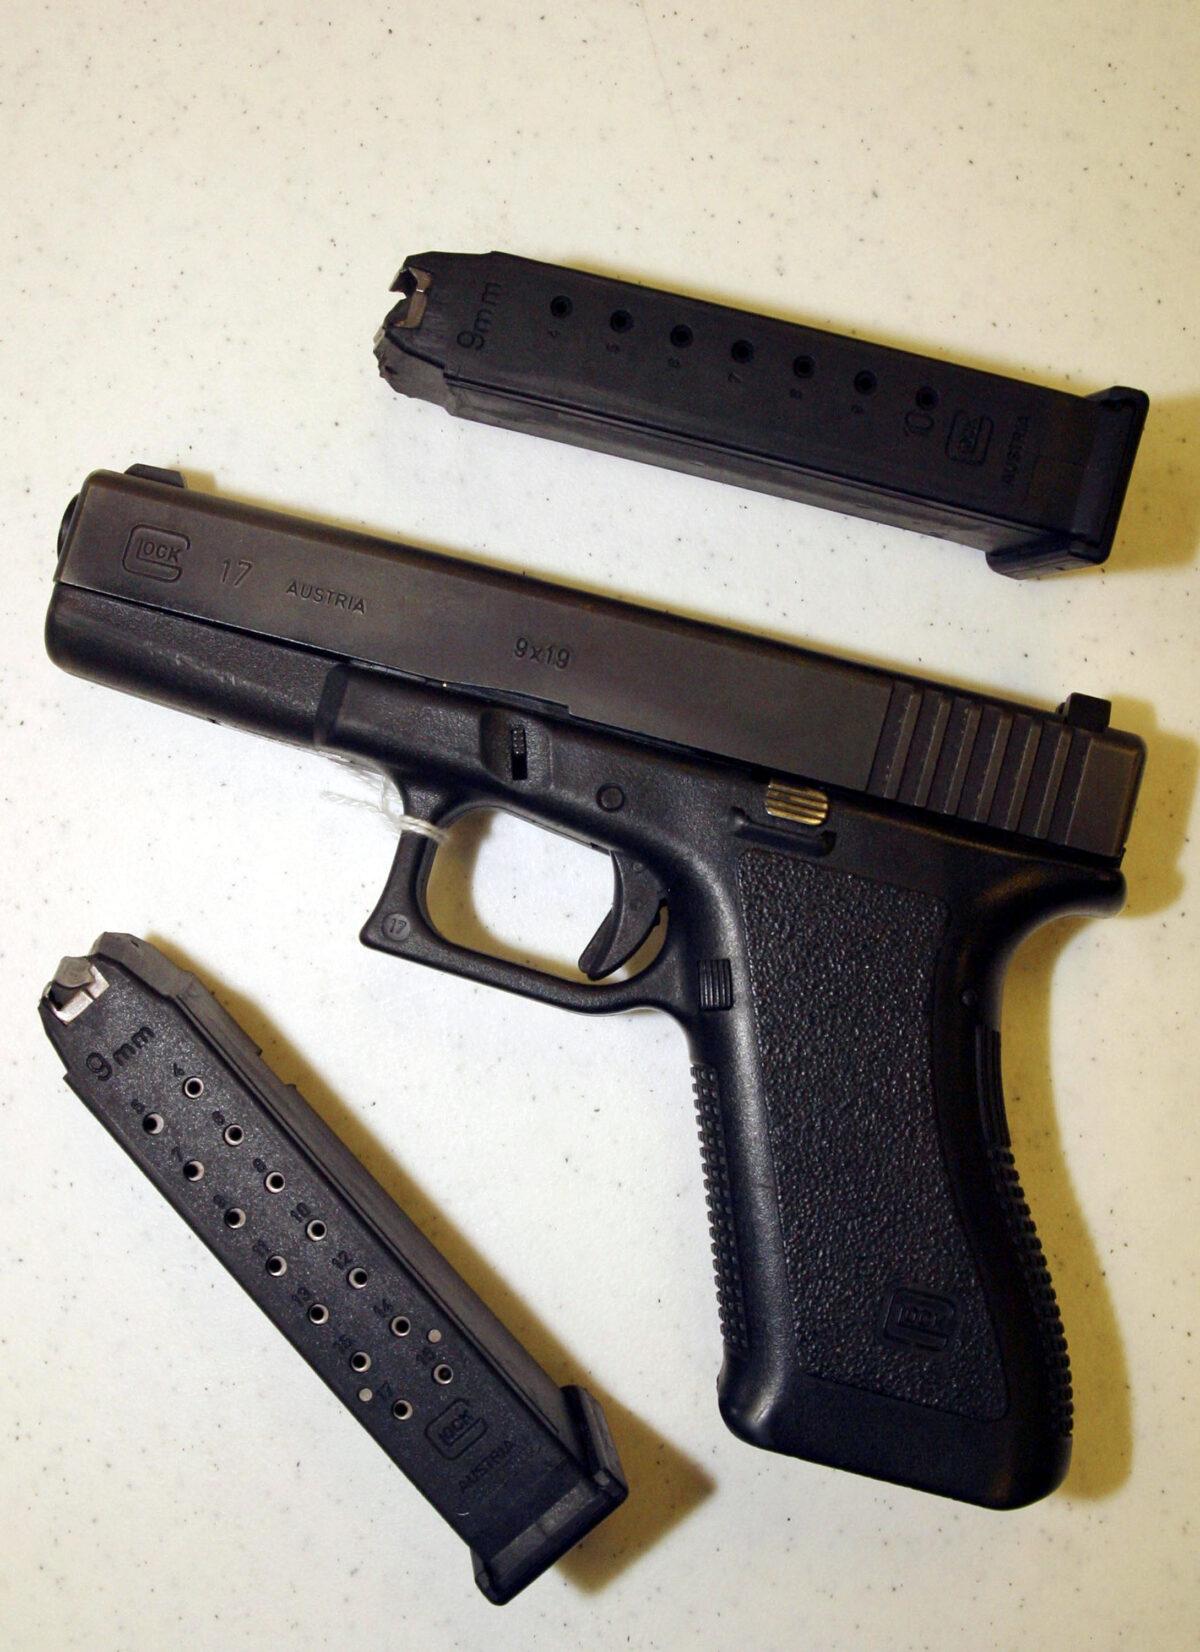 A Glock 9 mm pistol is displayed with two different capacity magazines, with the top clip holding 10 rounds and the bottom 18, at a shooting range in Bossier City, Louisiana, on Sept. 11, 2004. (Mario Villafuerte/Getty Images)